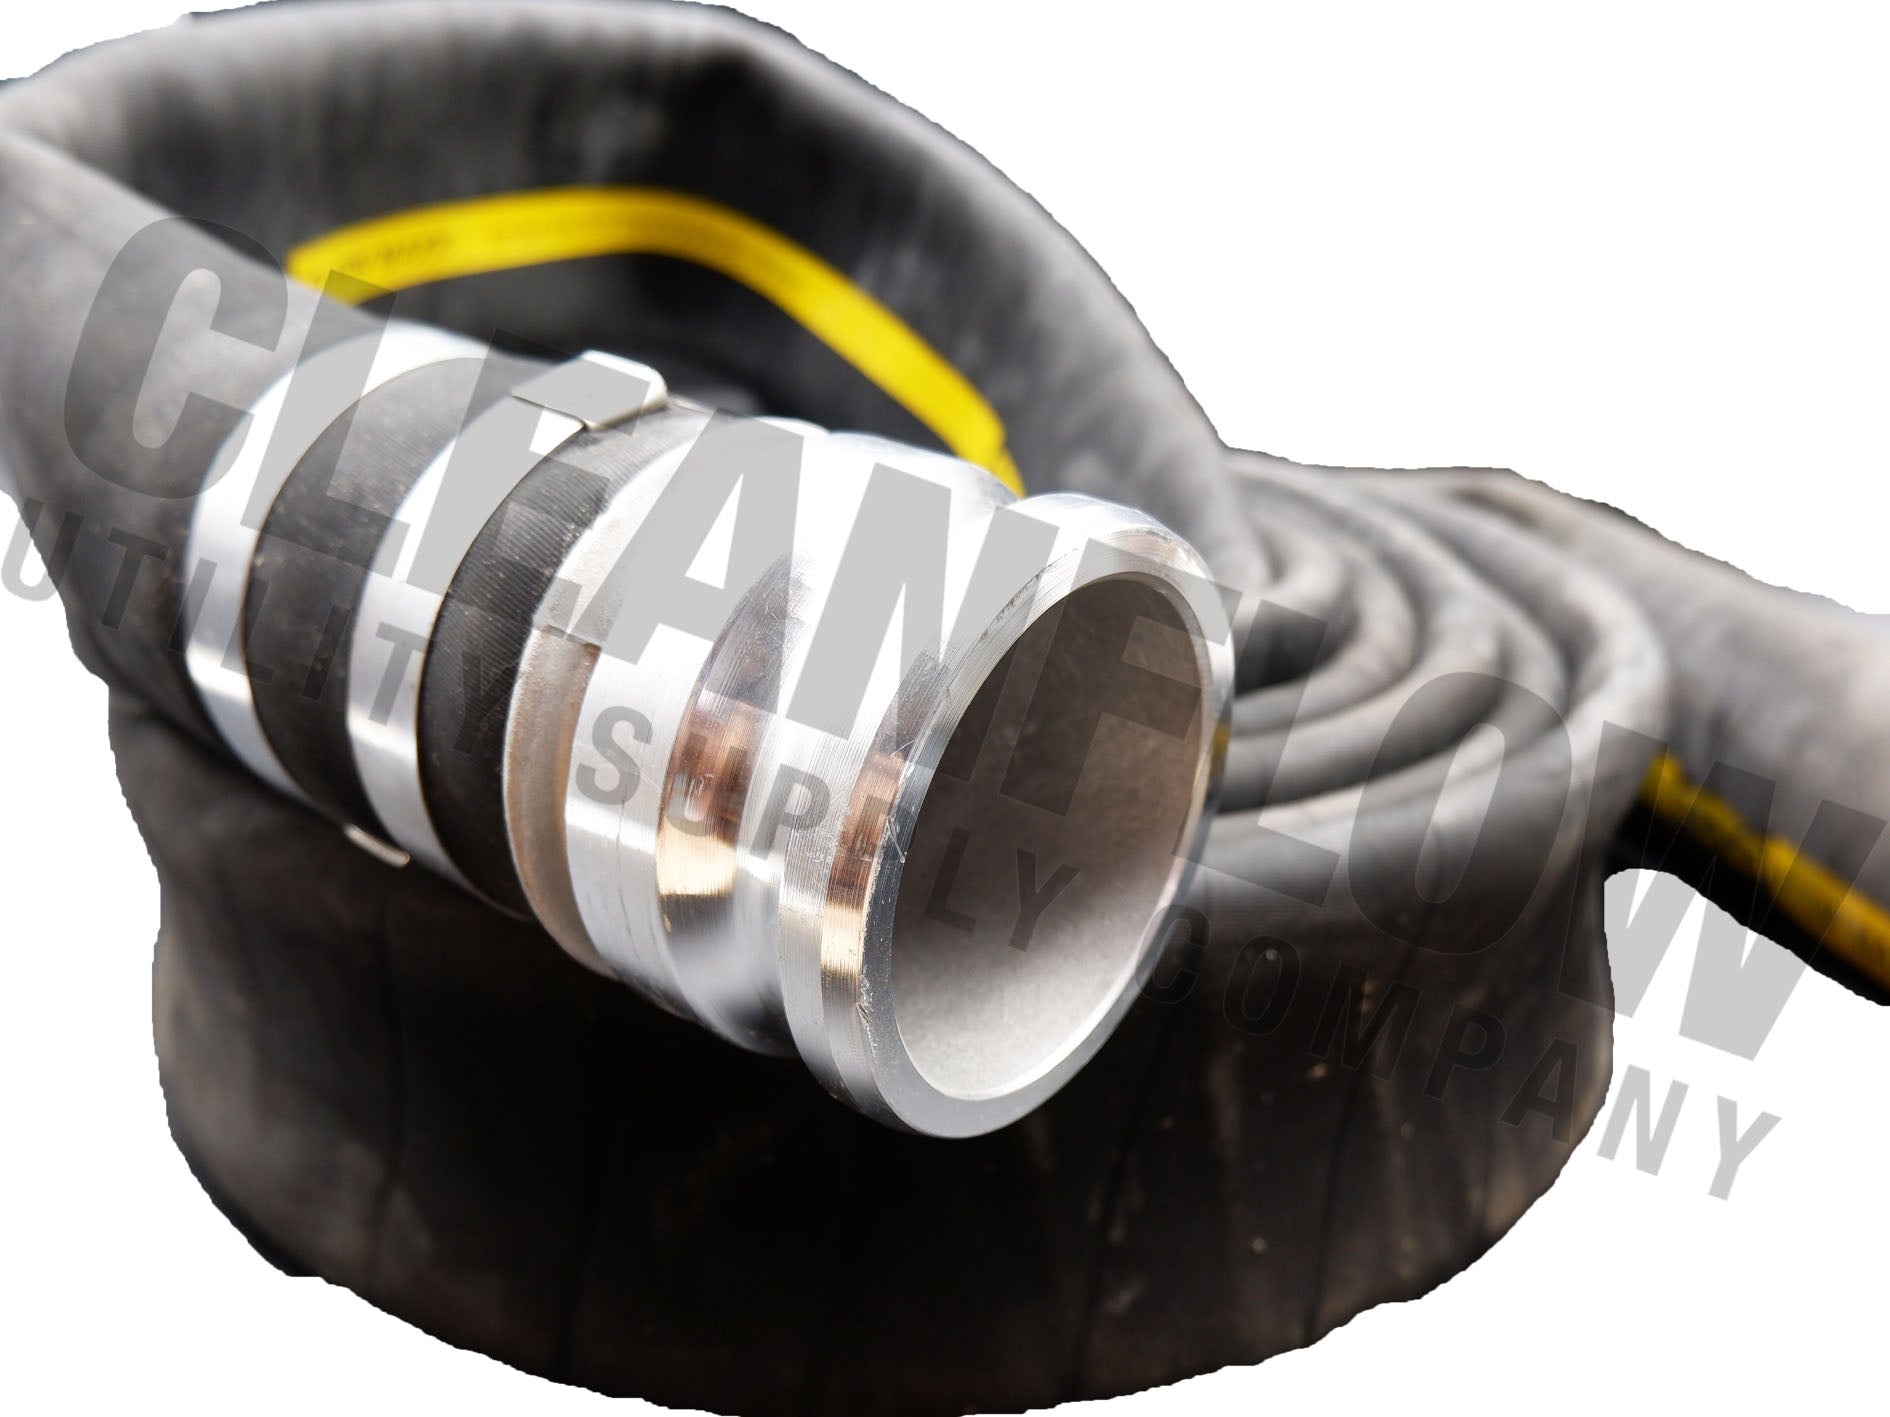 Flow Maxx Contractor's Water Discharge Hose Assemblies (w/ Male X Female Camlocks) - Limited Size Selection Hose and Fittings - Cleanflow